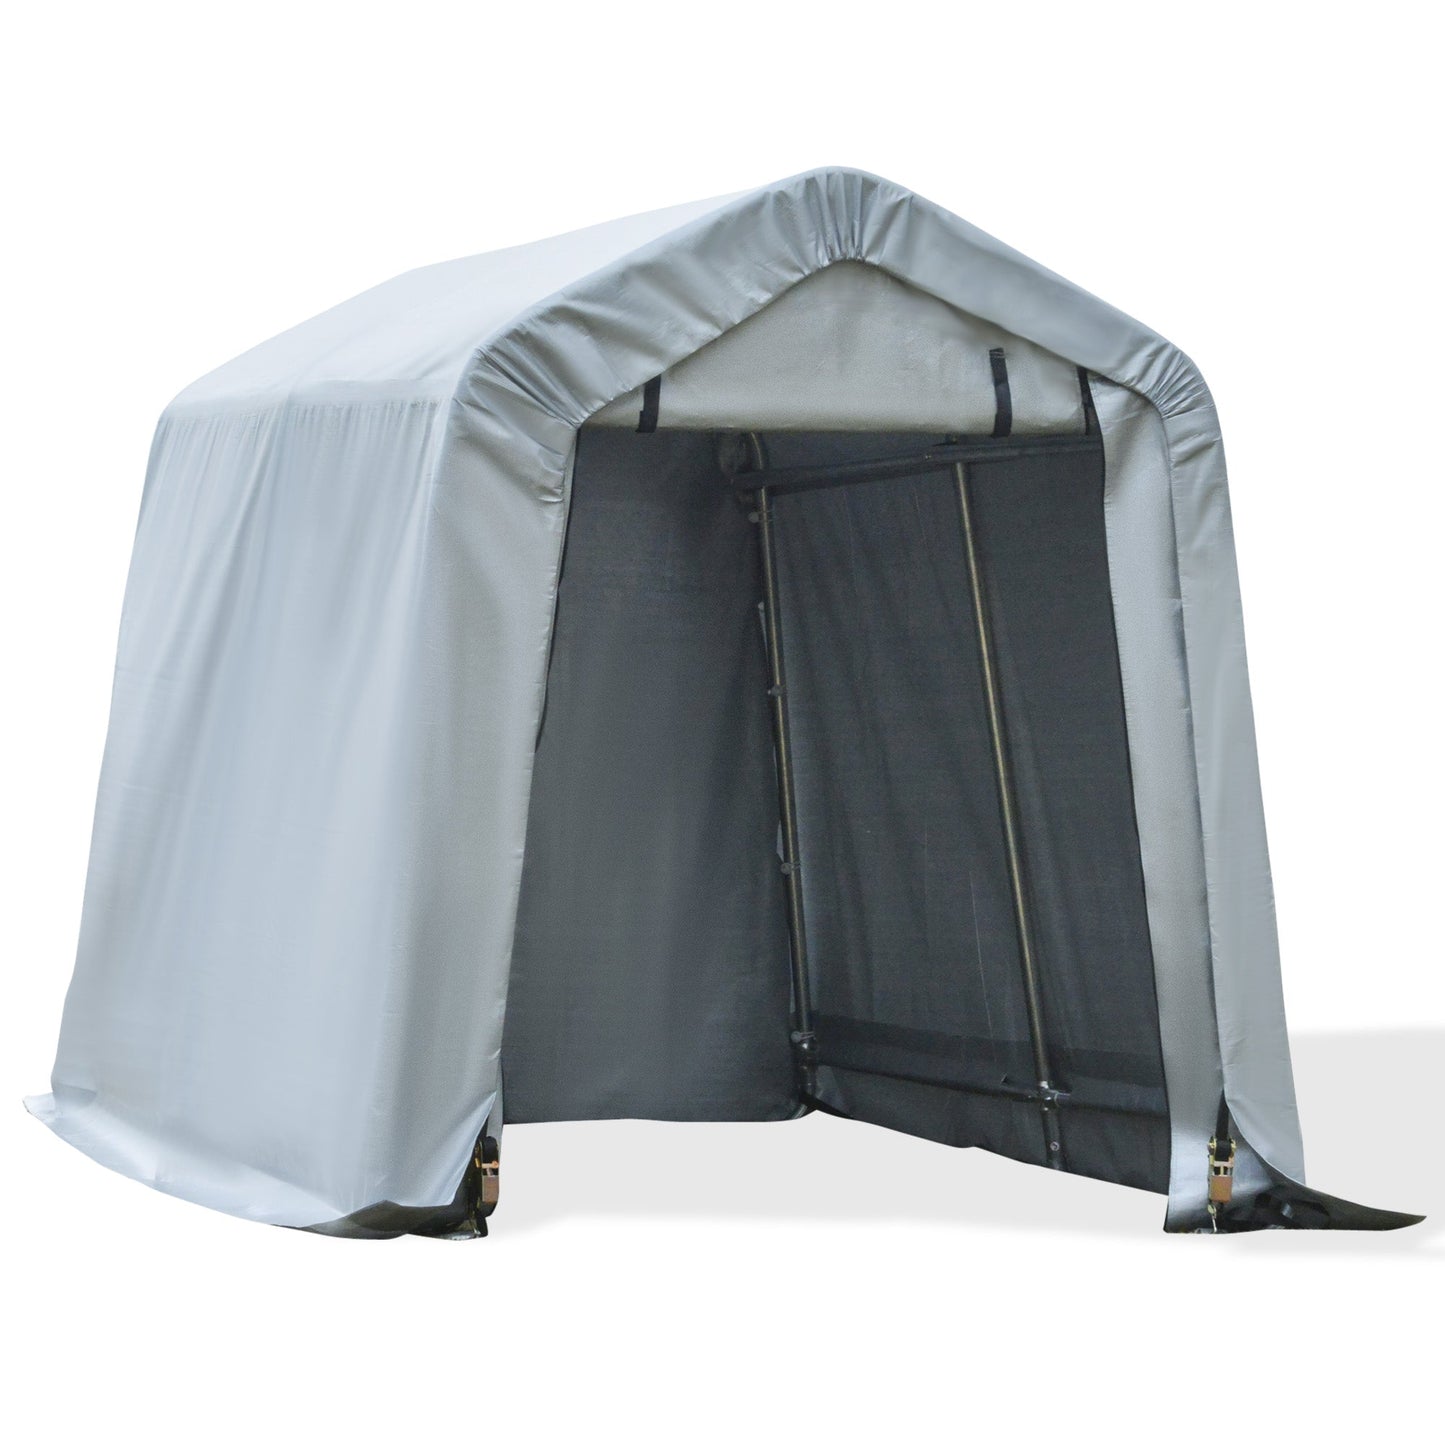 -Outsunny 8' x 6' Outdoor Car Tent Carport, Canopy Garage Storage Shelter with Roll-up Door, Steel Frame & PE Cover, Gray - Outdoor Style Company